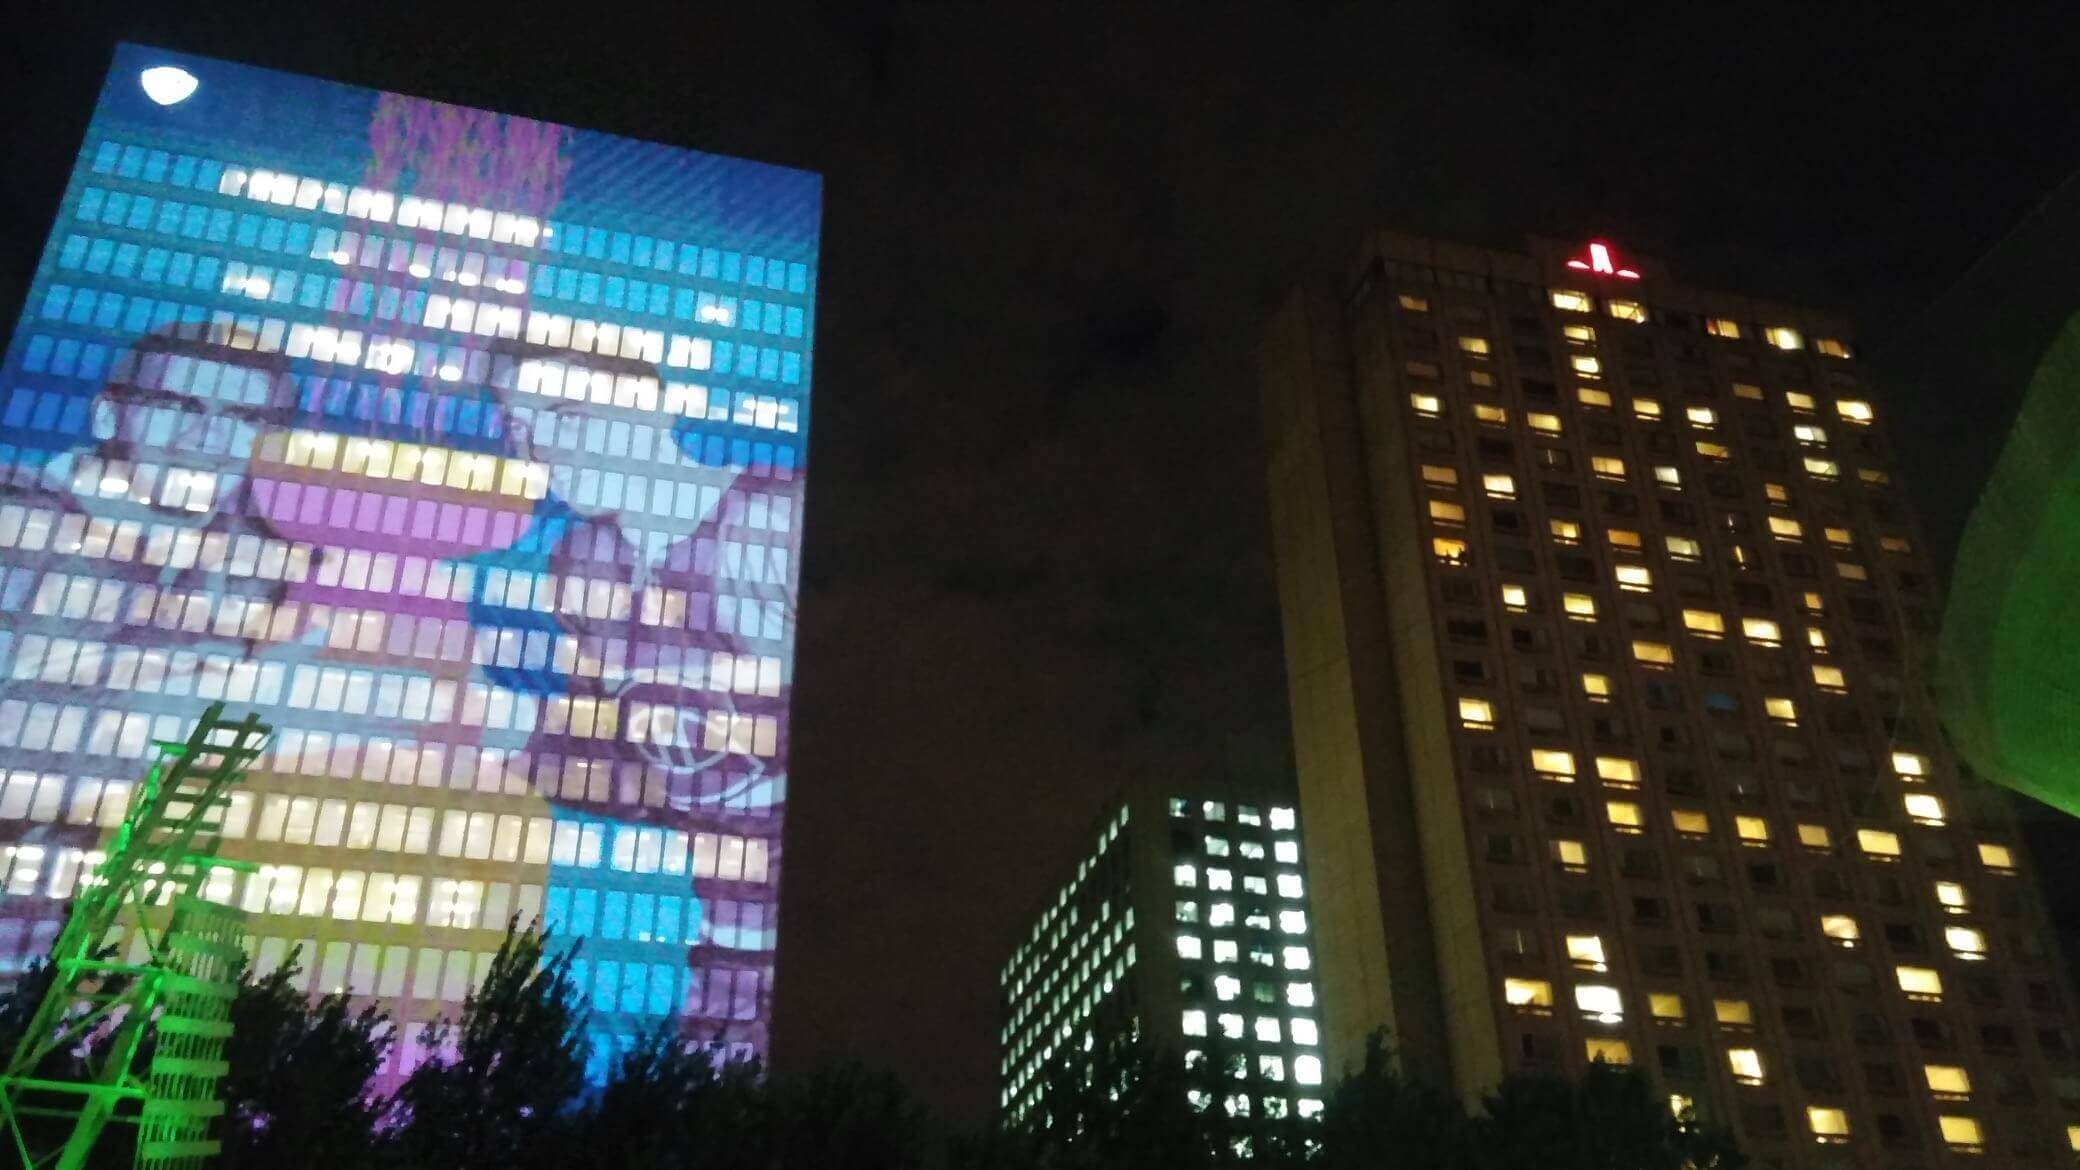 Buildings lit up with trippy advertisements, perfect accompaniment to the music